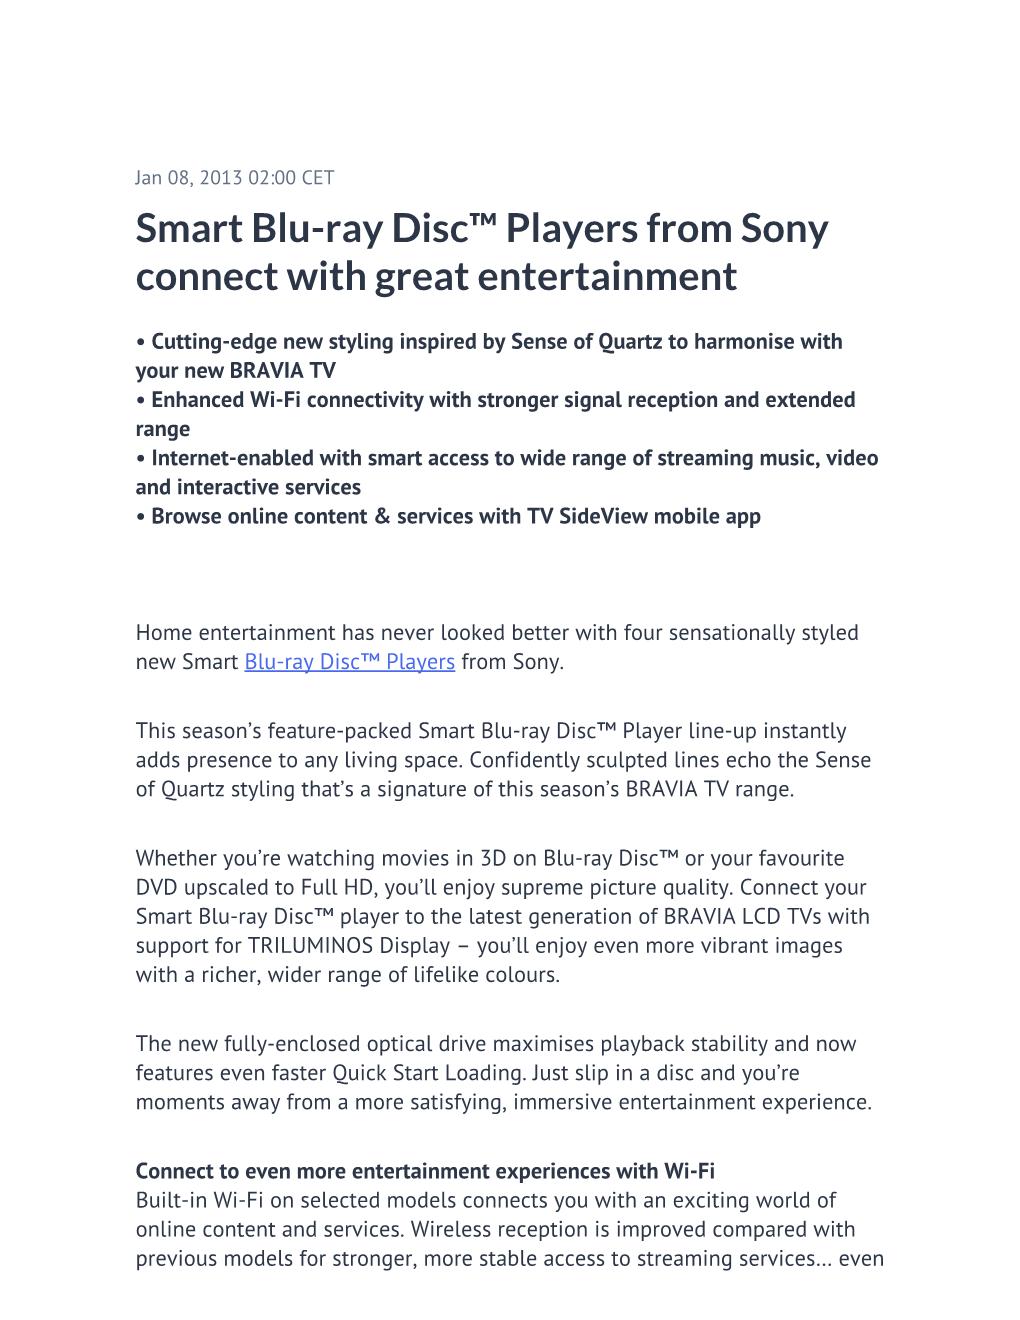 Smart Blu-Ray Disc™ Players from Sony Connect with Great Entertainment